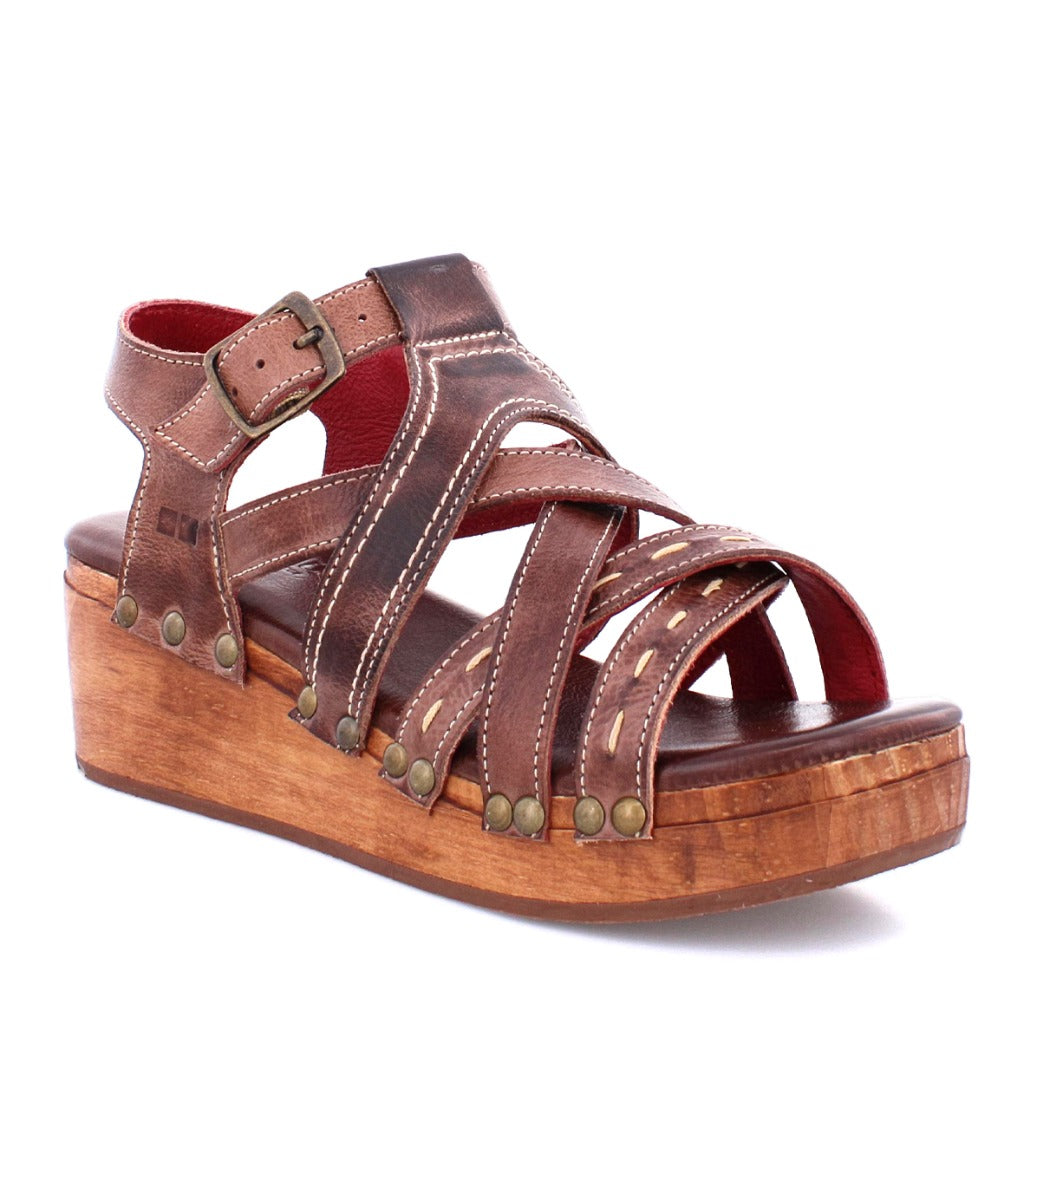 A women's Shirley sandal with a wooden platform and straps by Bed Stu.